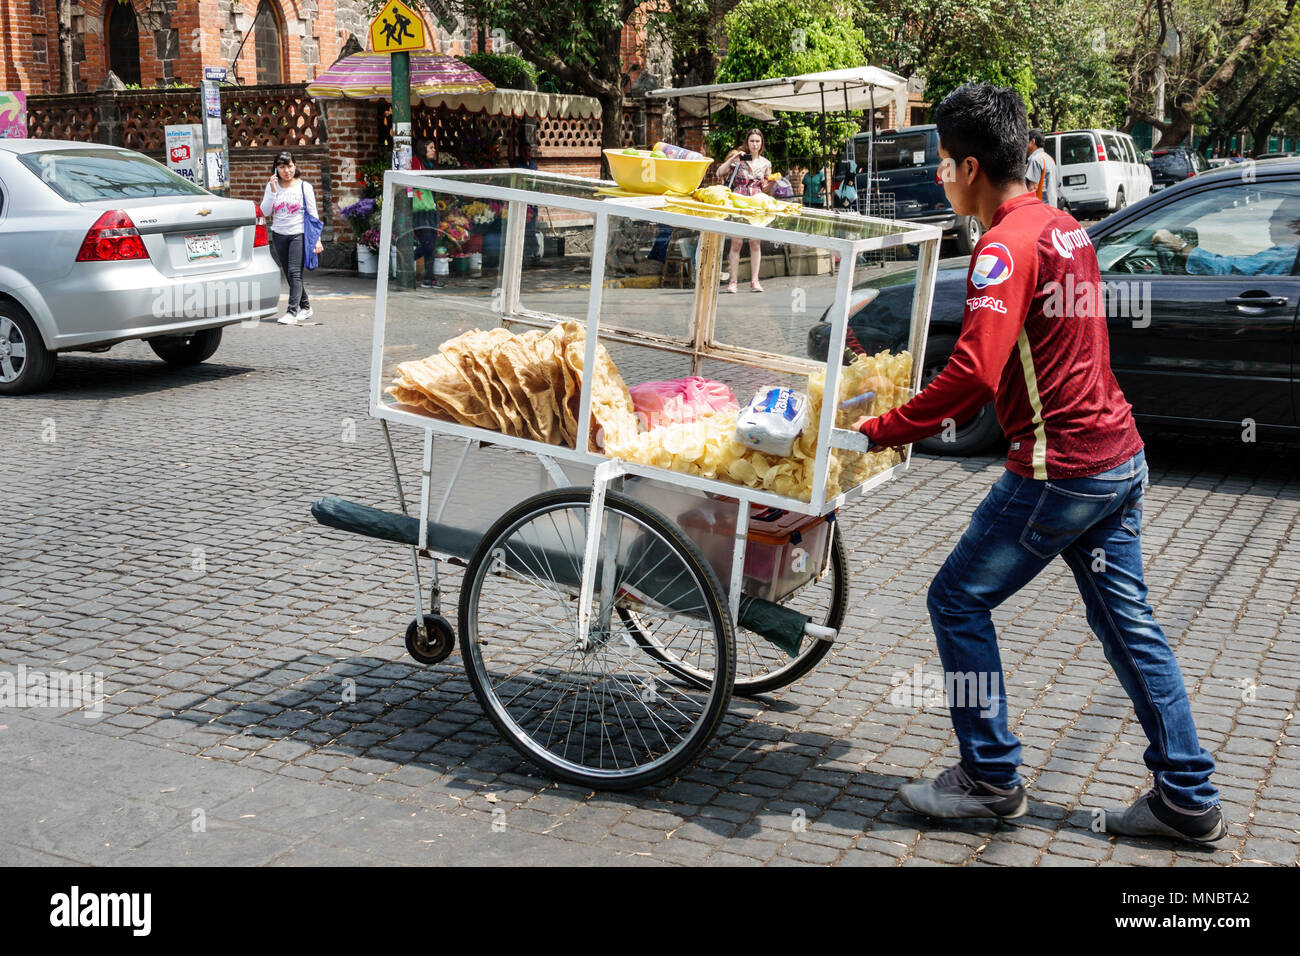 Mexico City,Mexican,Hispanic,Coyoacan,Del Carmen,street vendor vendors seller sell selling,stall stalls booth market marketplace,snacks,cart,pushing,w Stock Photo